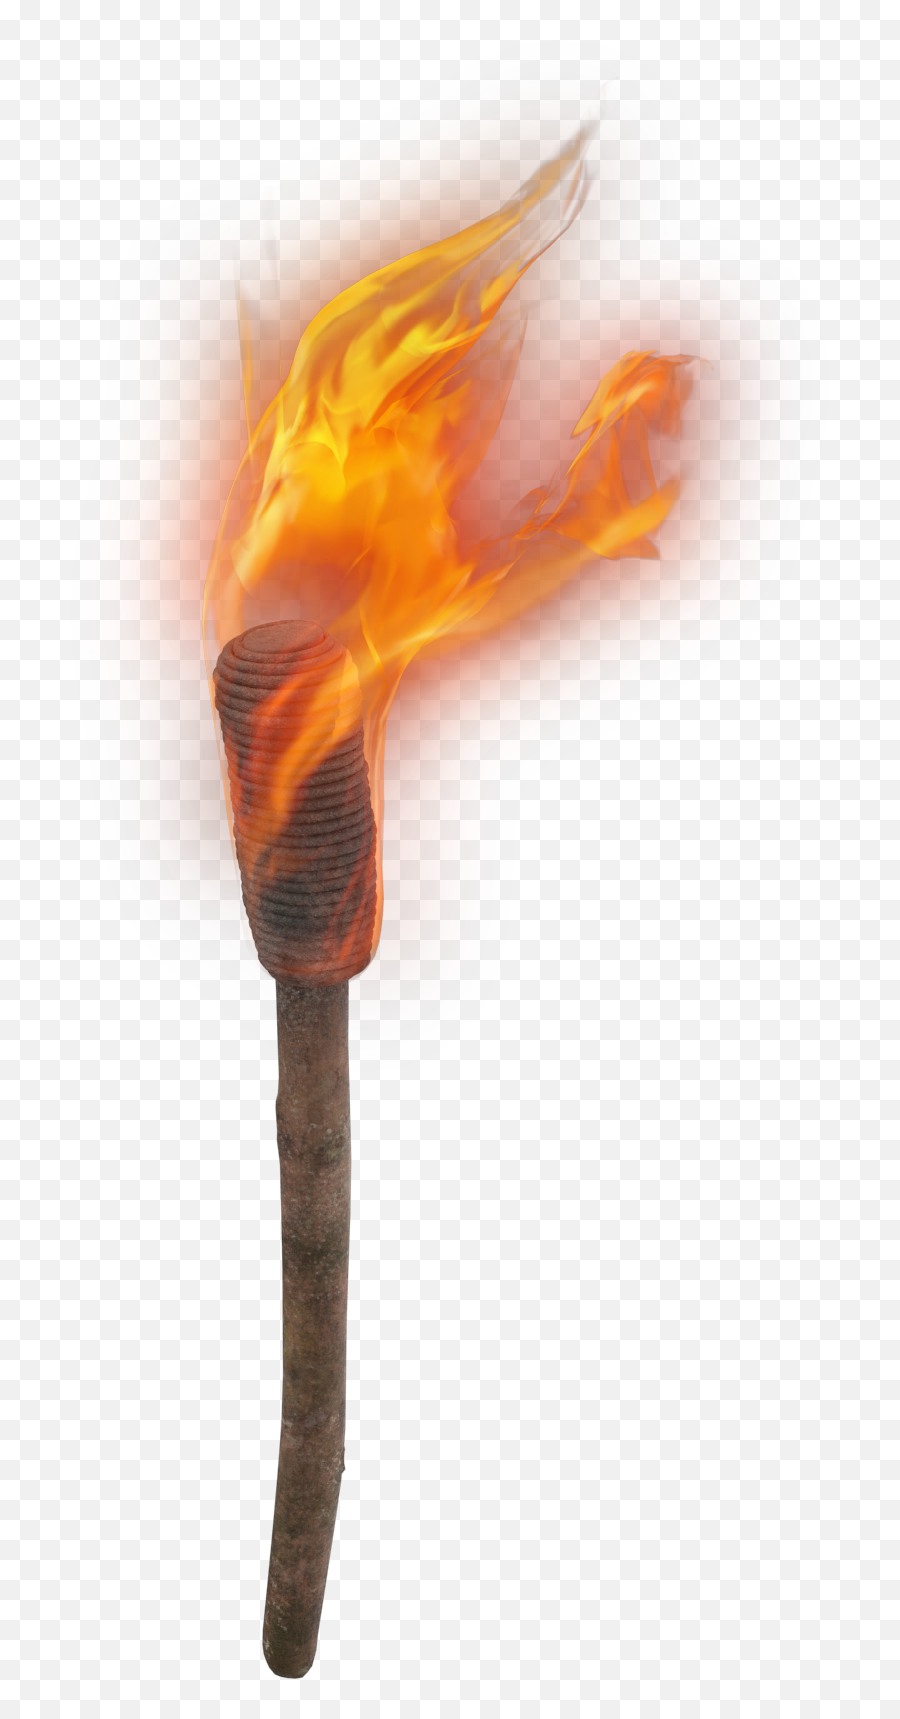 Torch Clipart Medieval - Transparent Fire Torch Hd Transparent Fire Torch Png,Fire Transparent Image